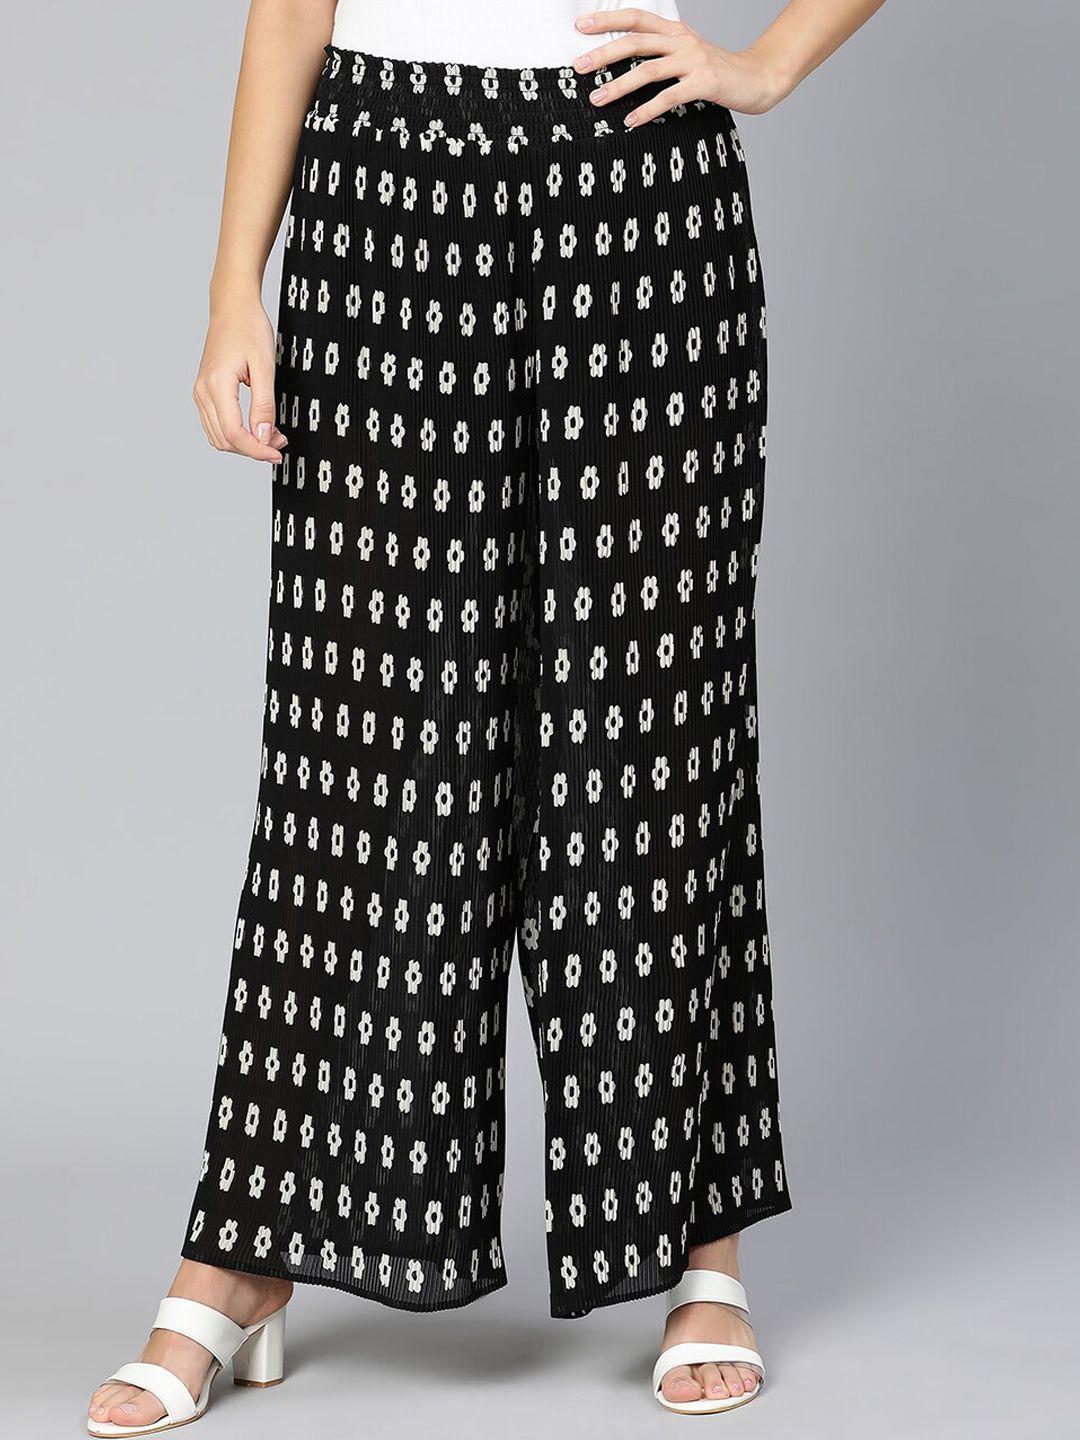 oxolloxo-women-black-printed-trousers